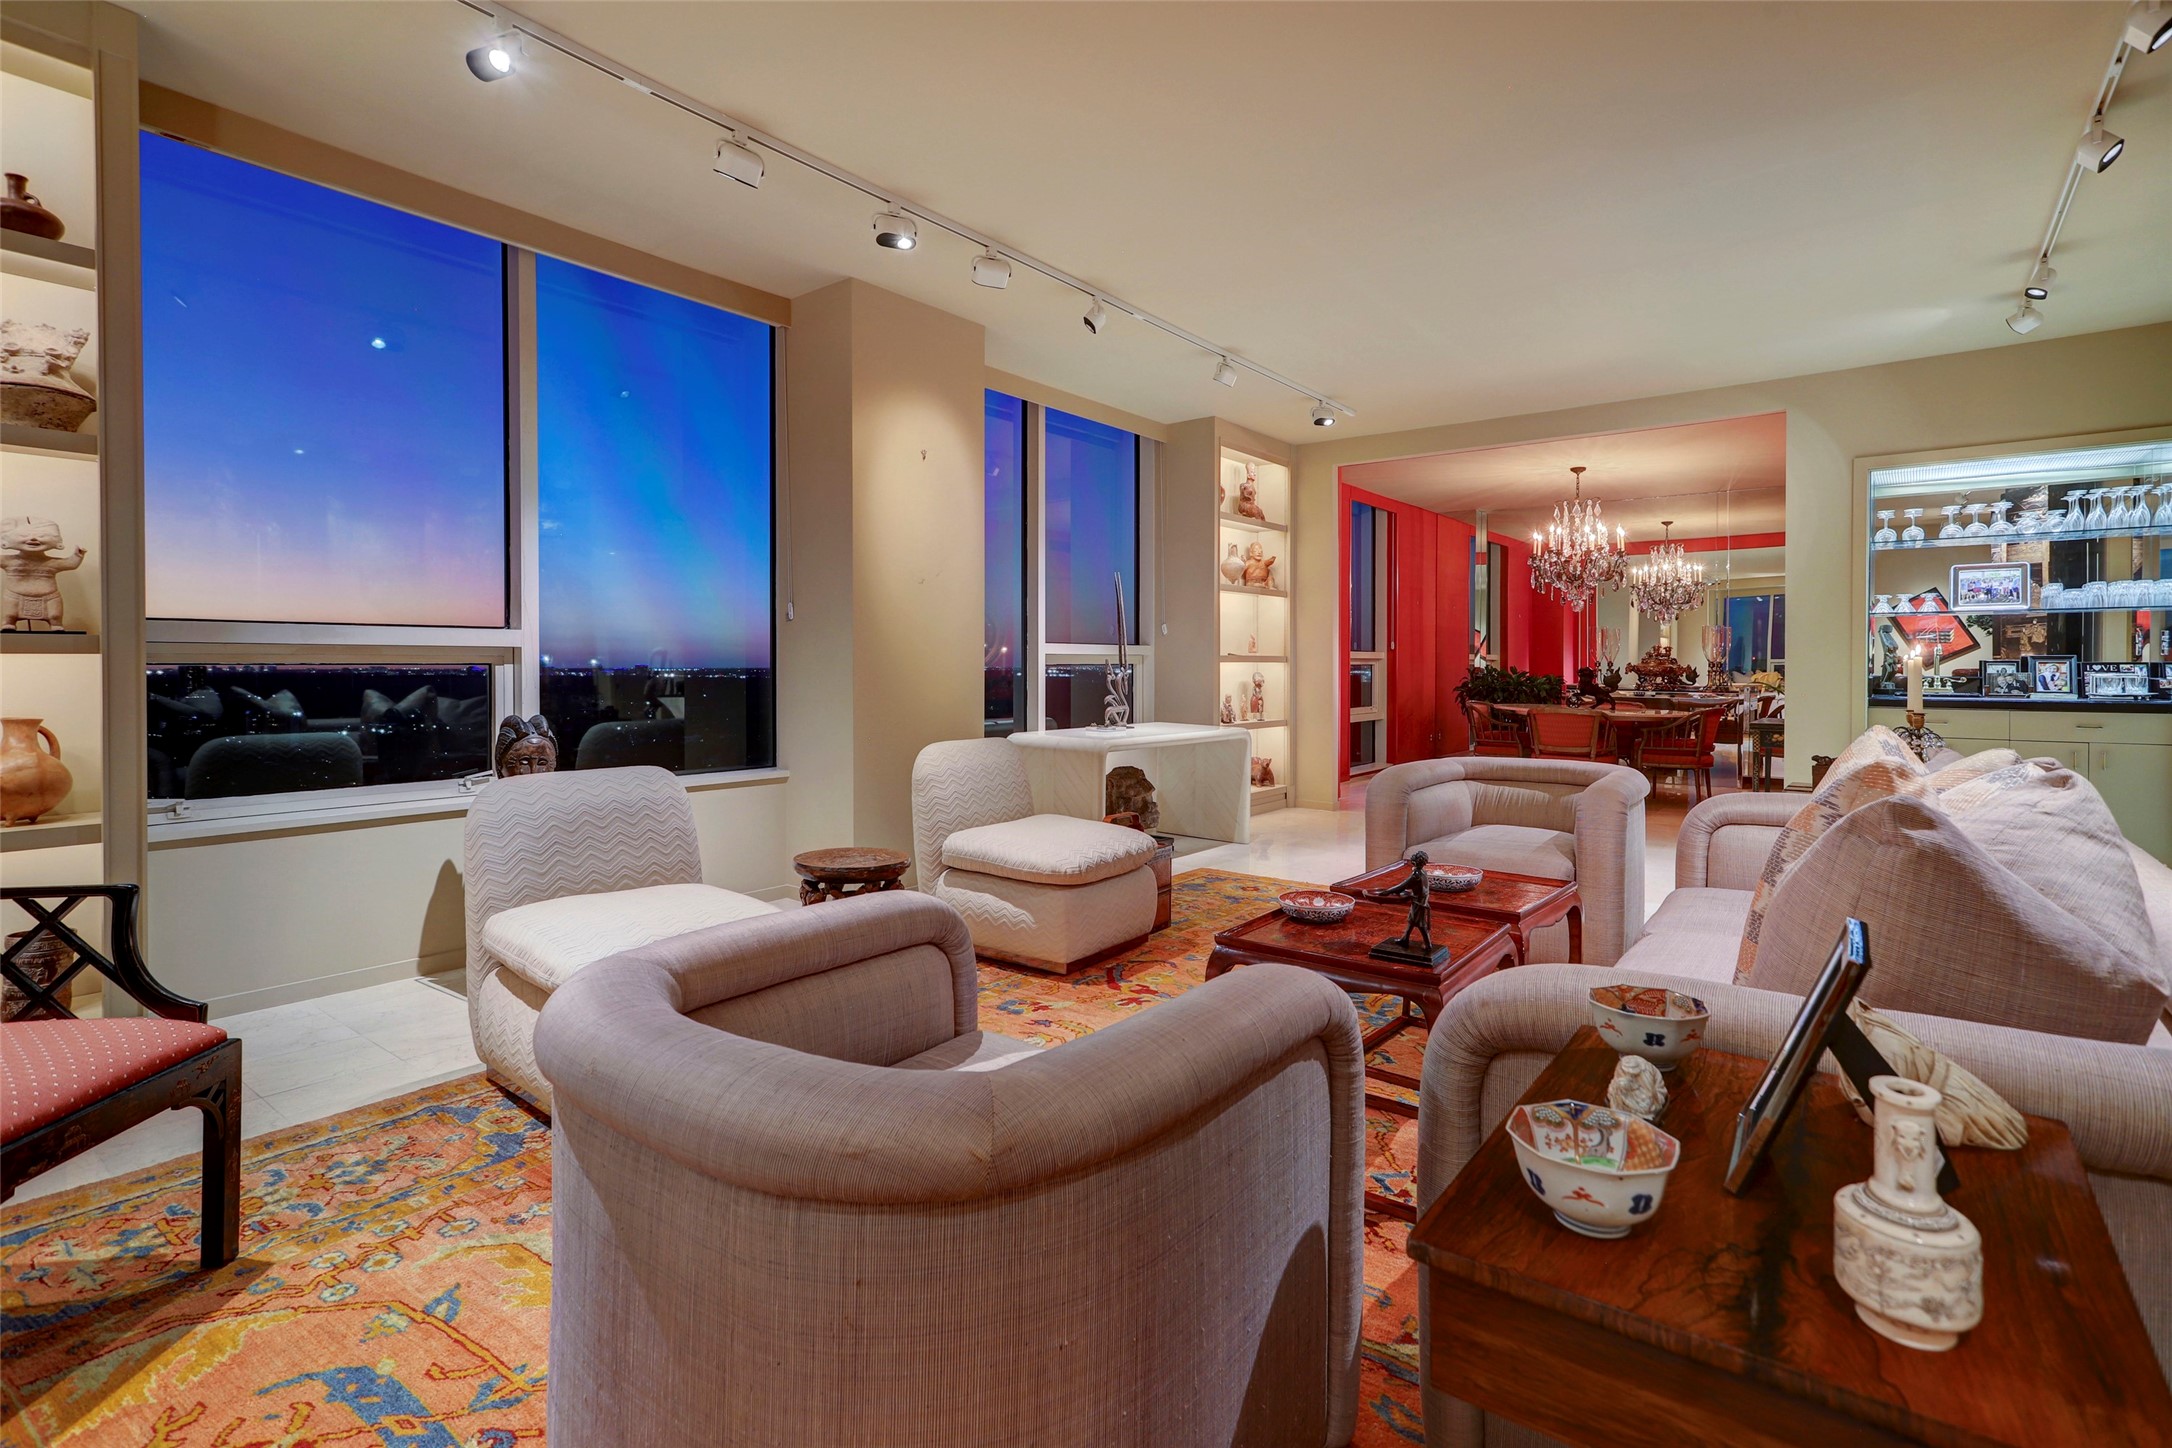 You'll love entertaining guests in this beautiful space while taking in the evening sunset views.